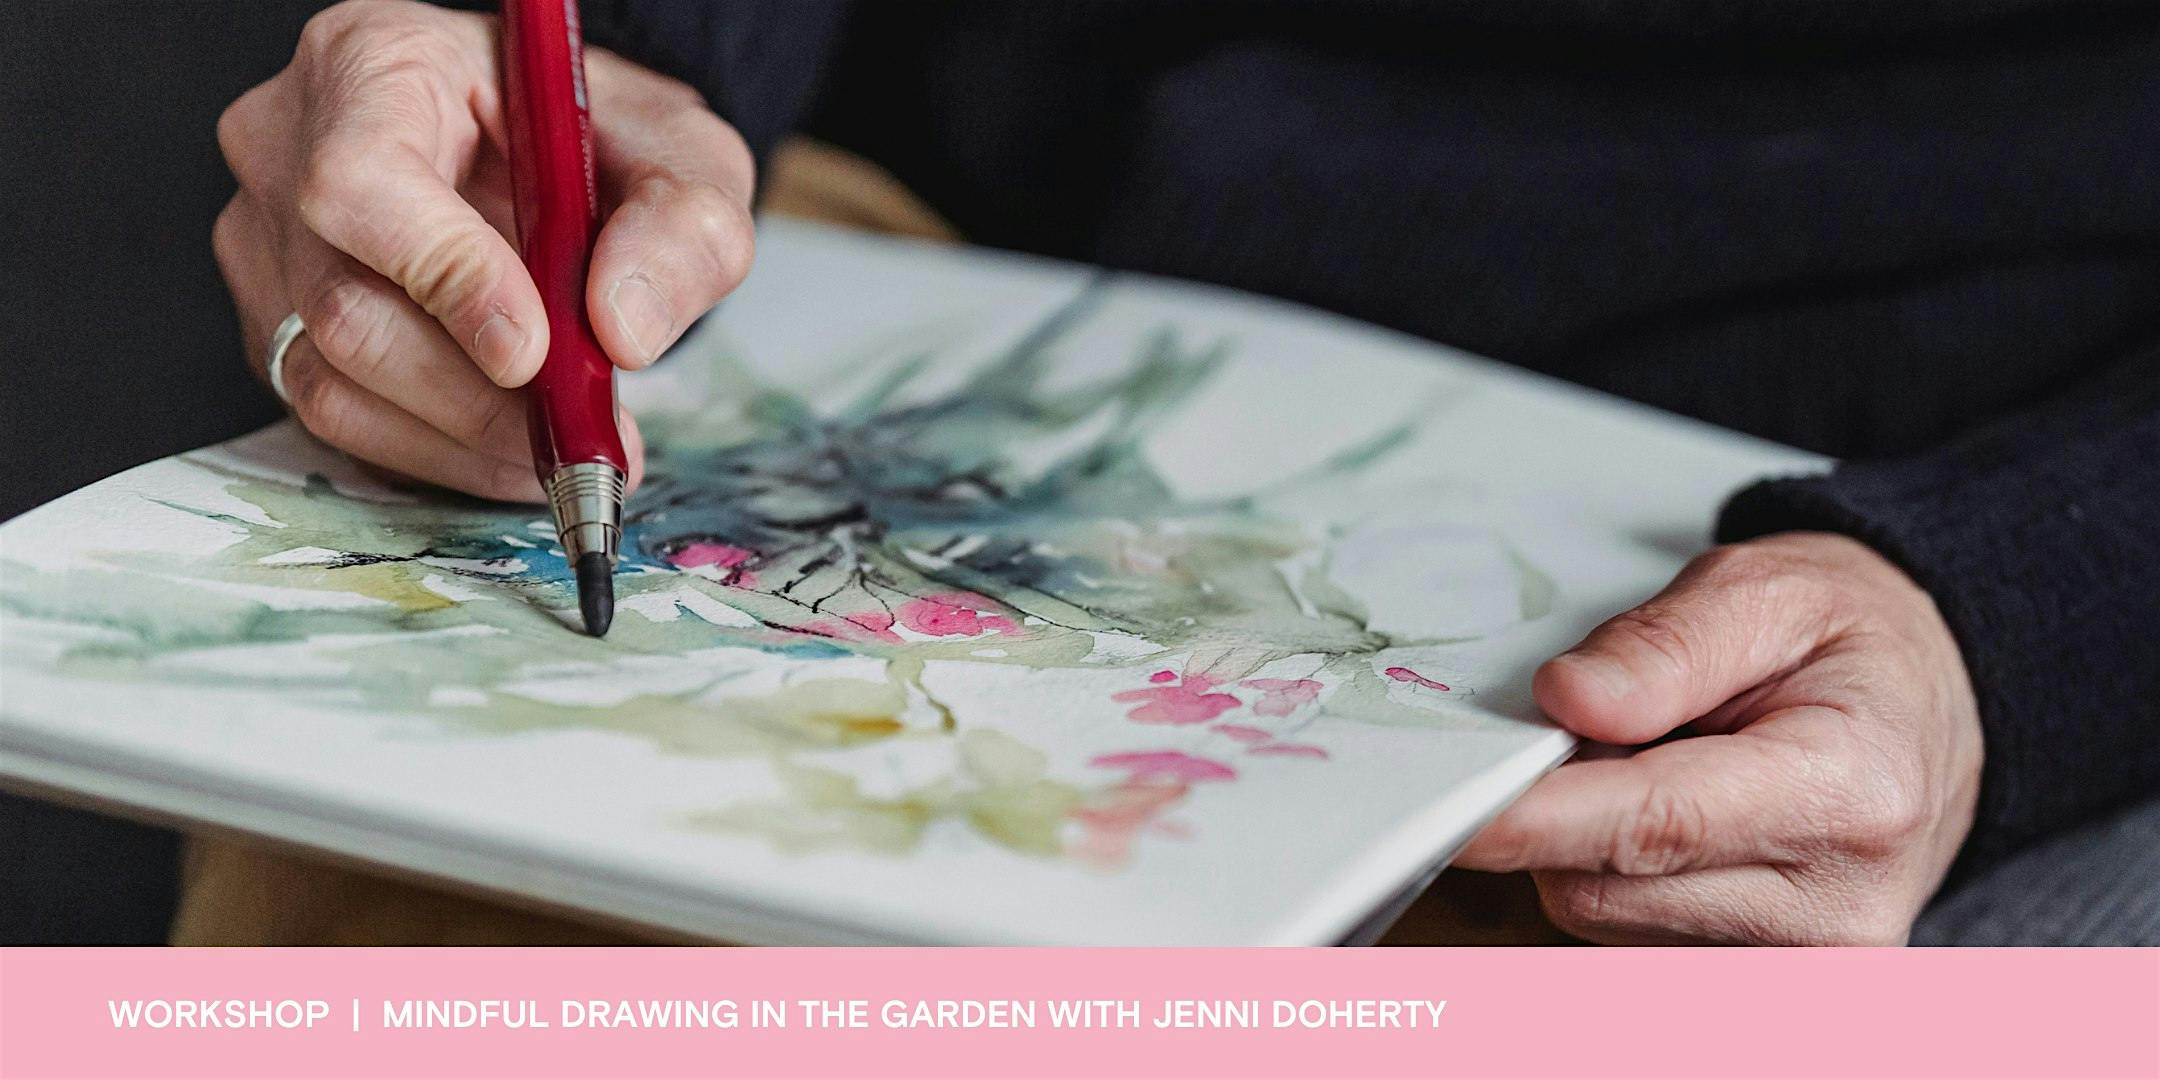 Hero image for Workshop | Mindful Drawing in the Garden with Jenni Doherty